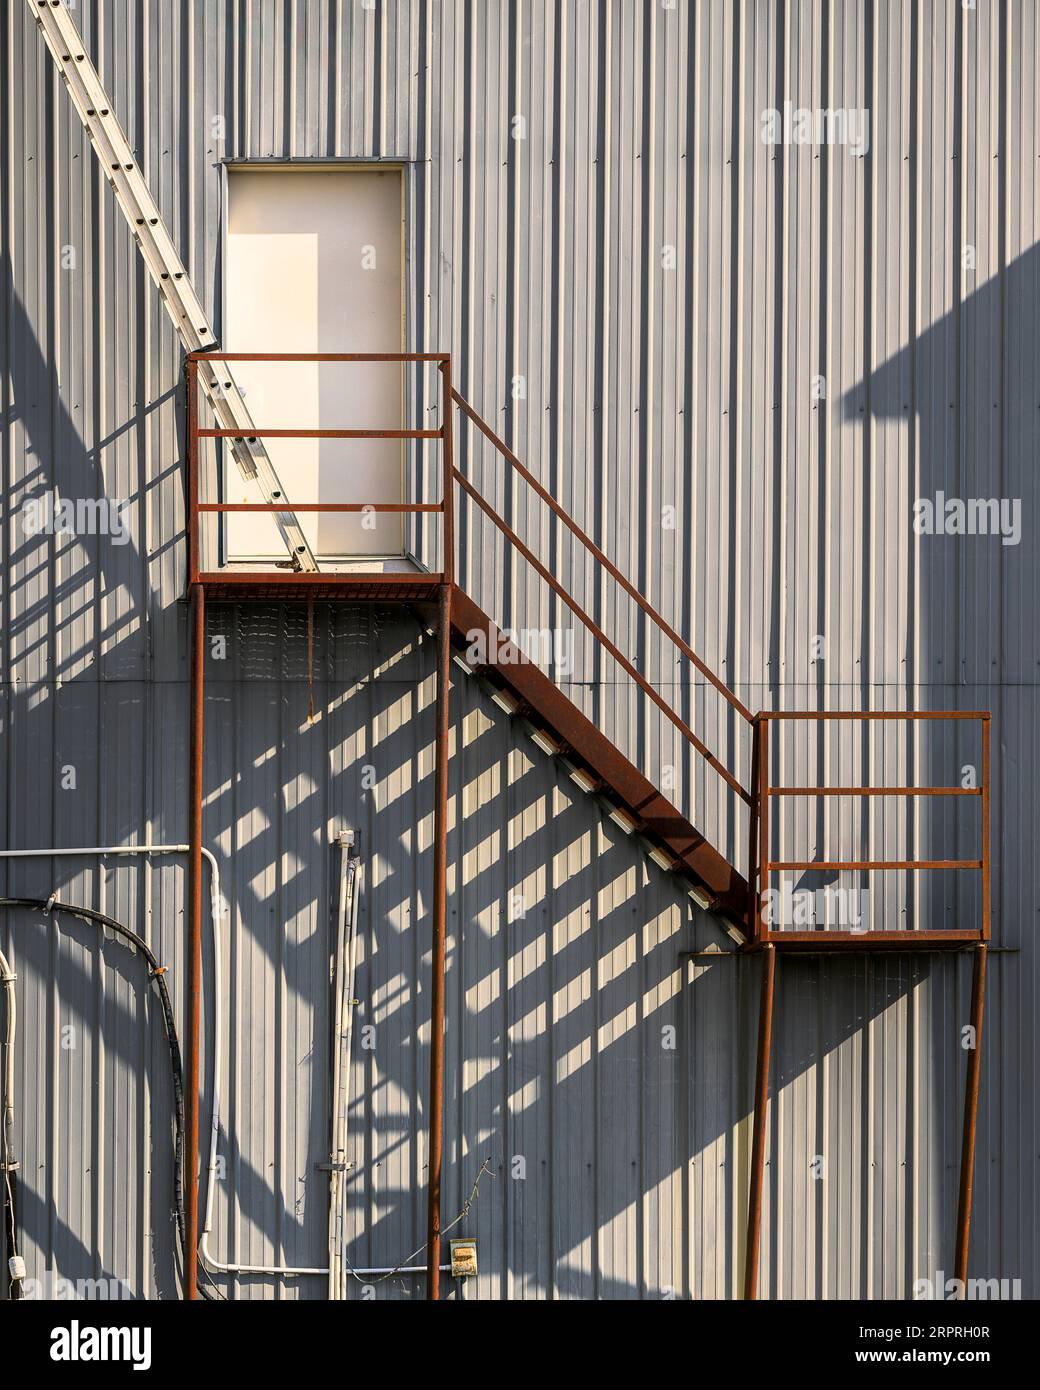 Shadows from fire escape stairs Stock Photo